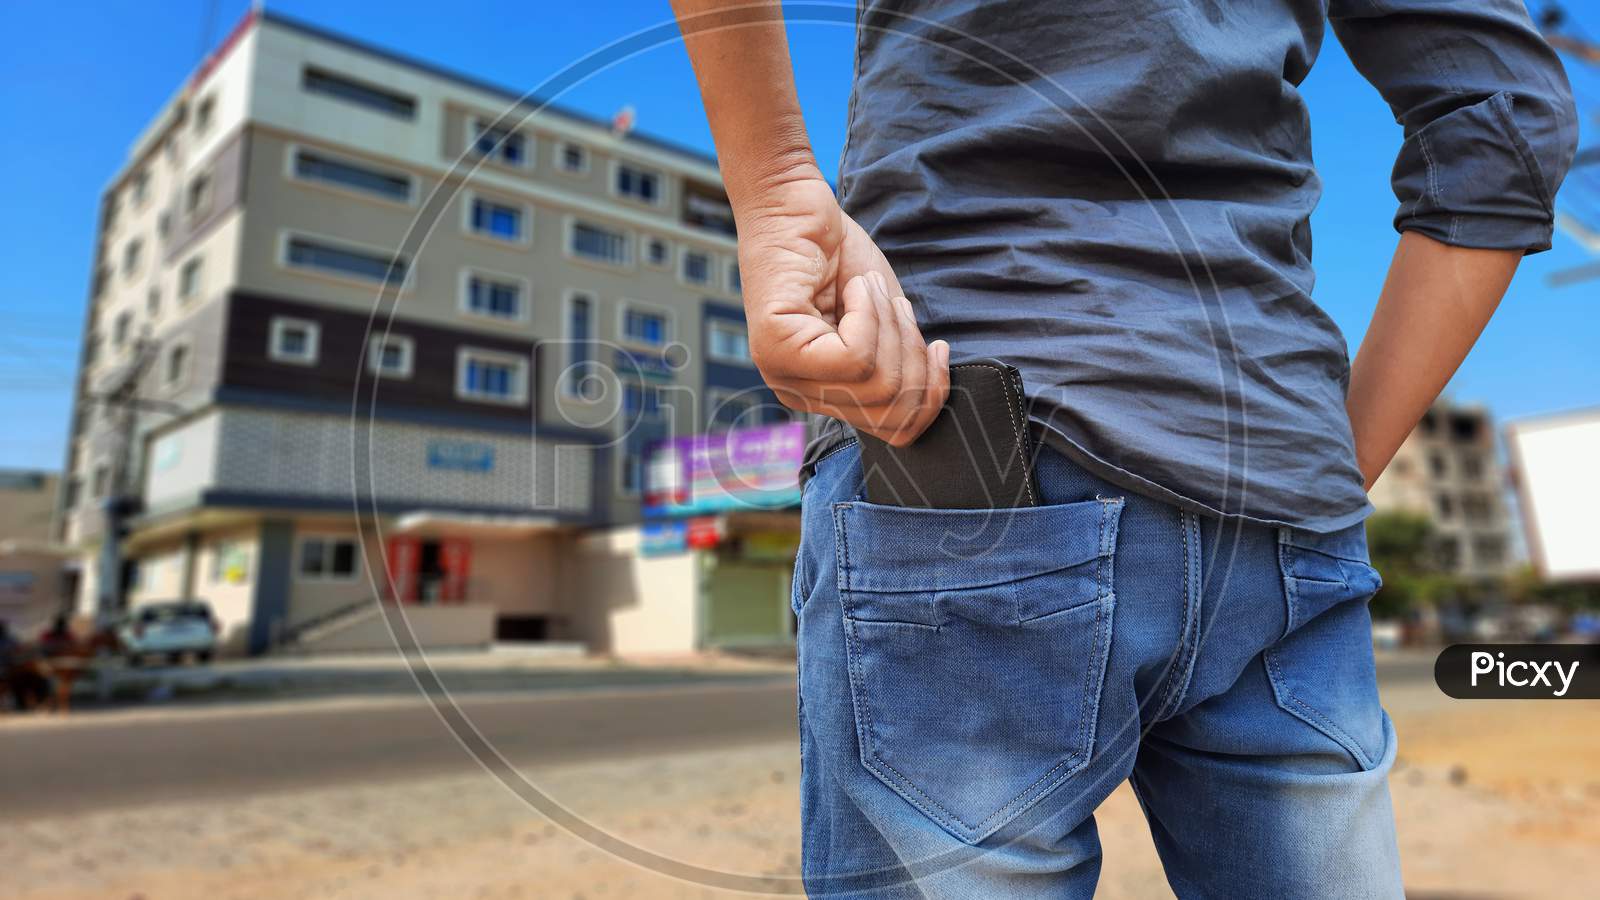 Young Indian Man Pulling Out Wallet From Back Pocket In Market